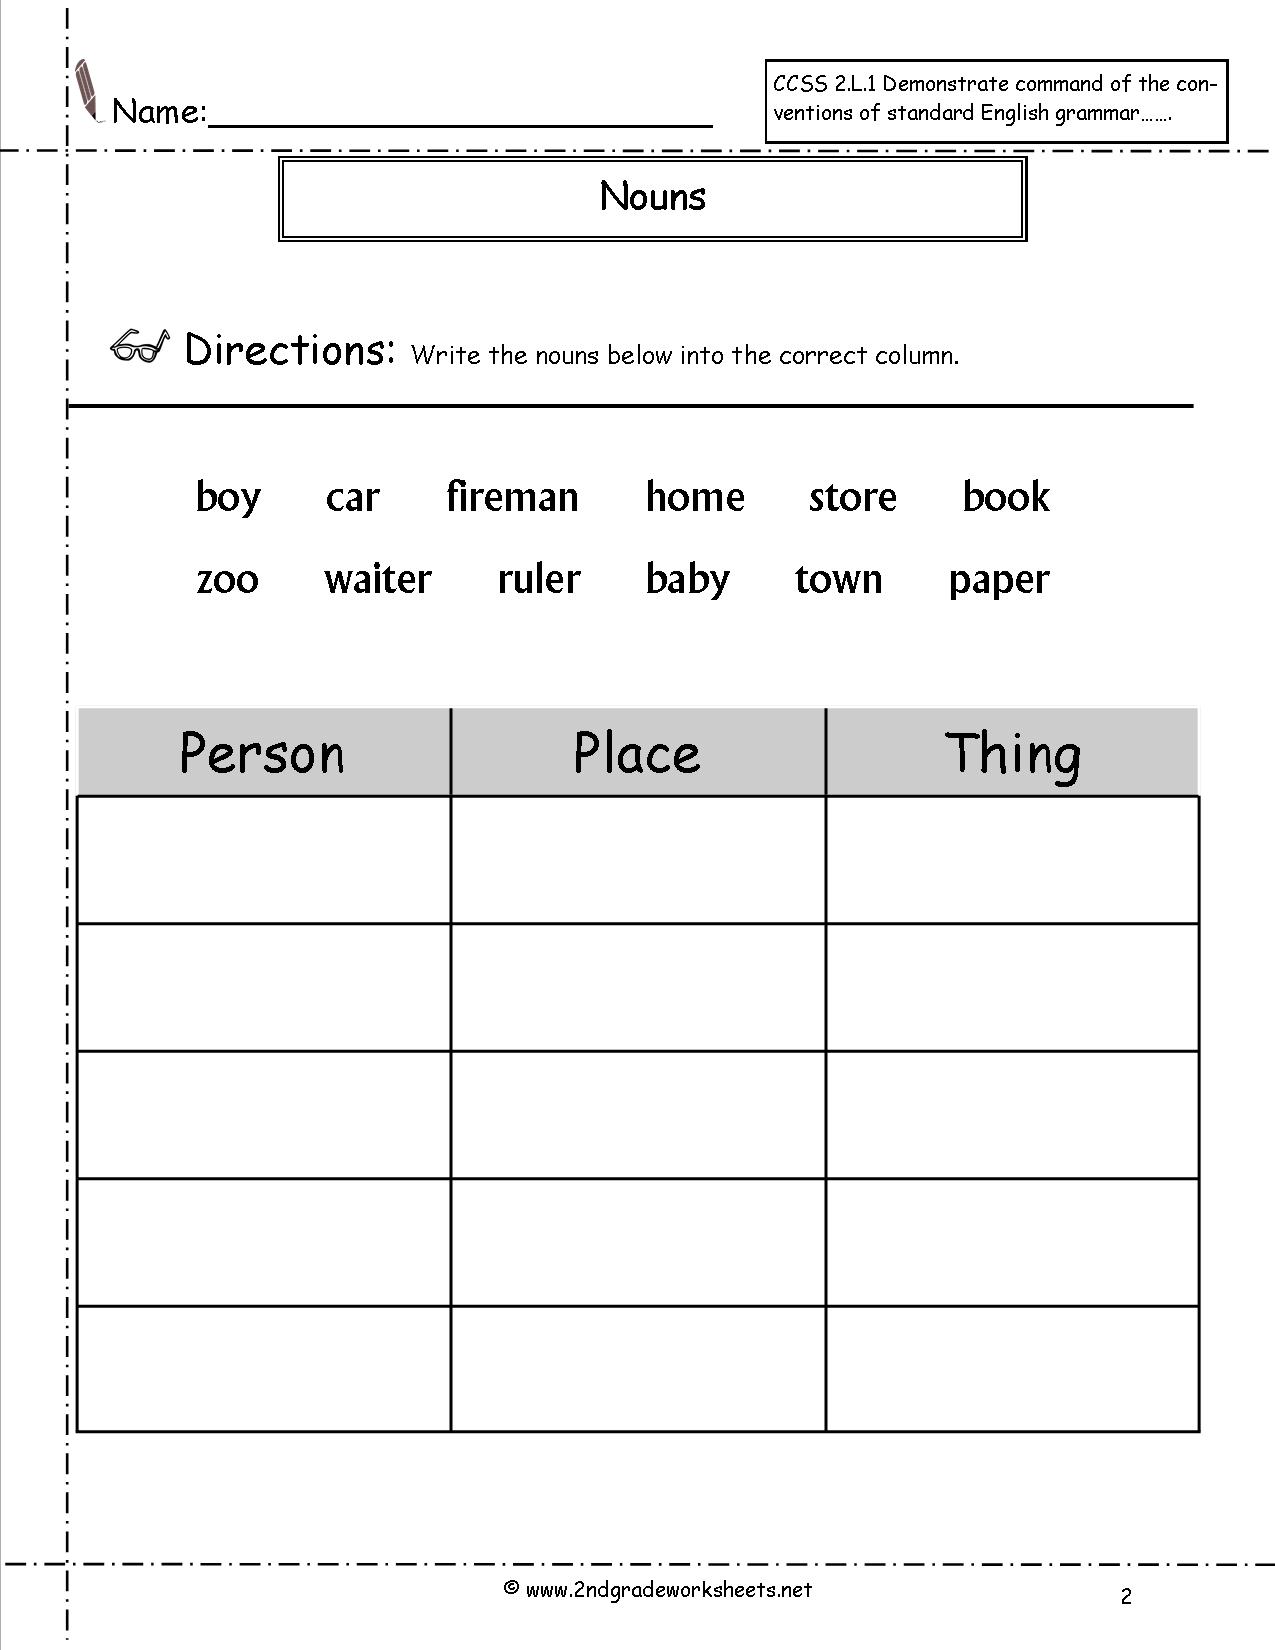 Noun Worksheets For Grade 1 The Best Worksheets Image Collection